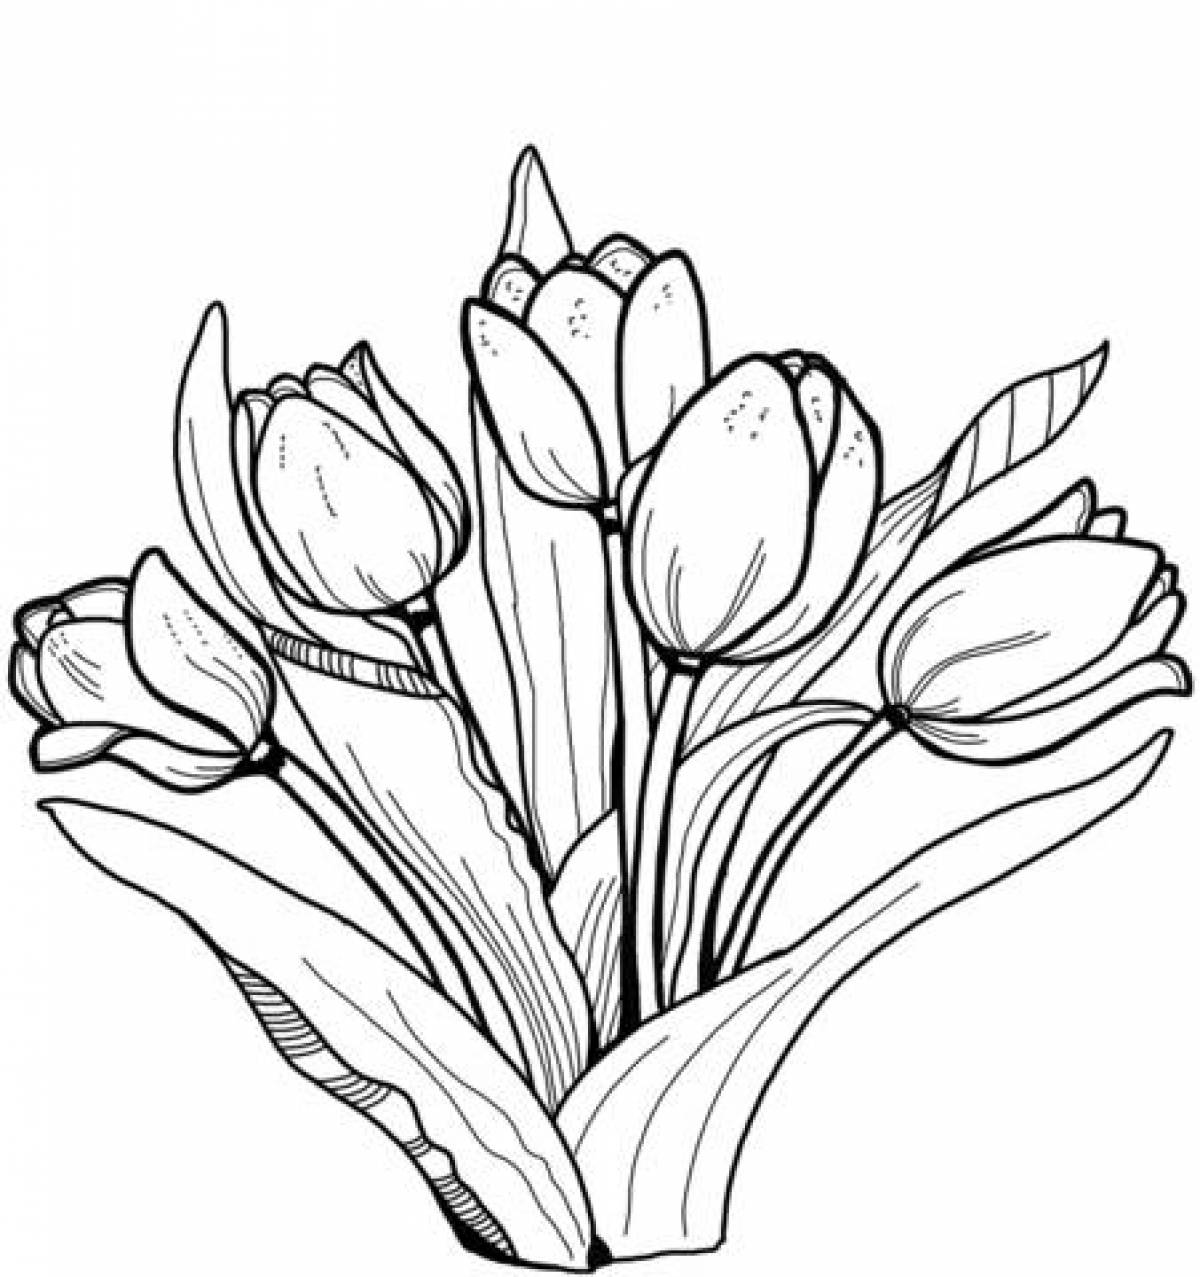 Tulip coloring page